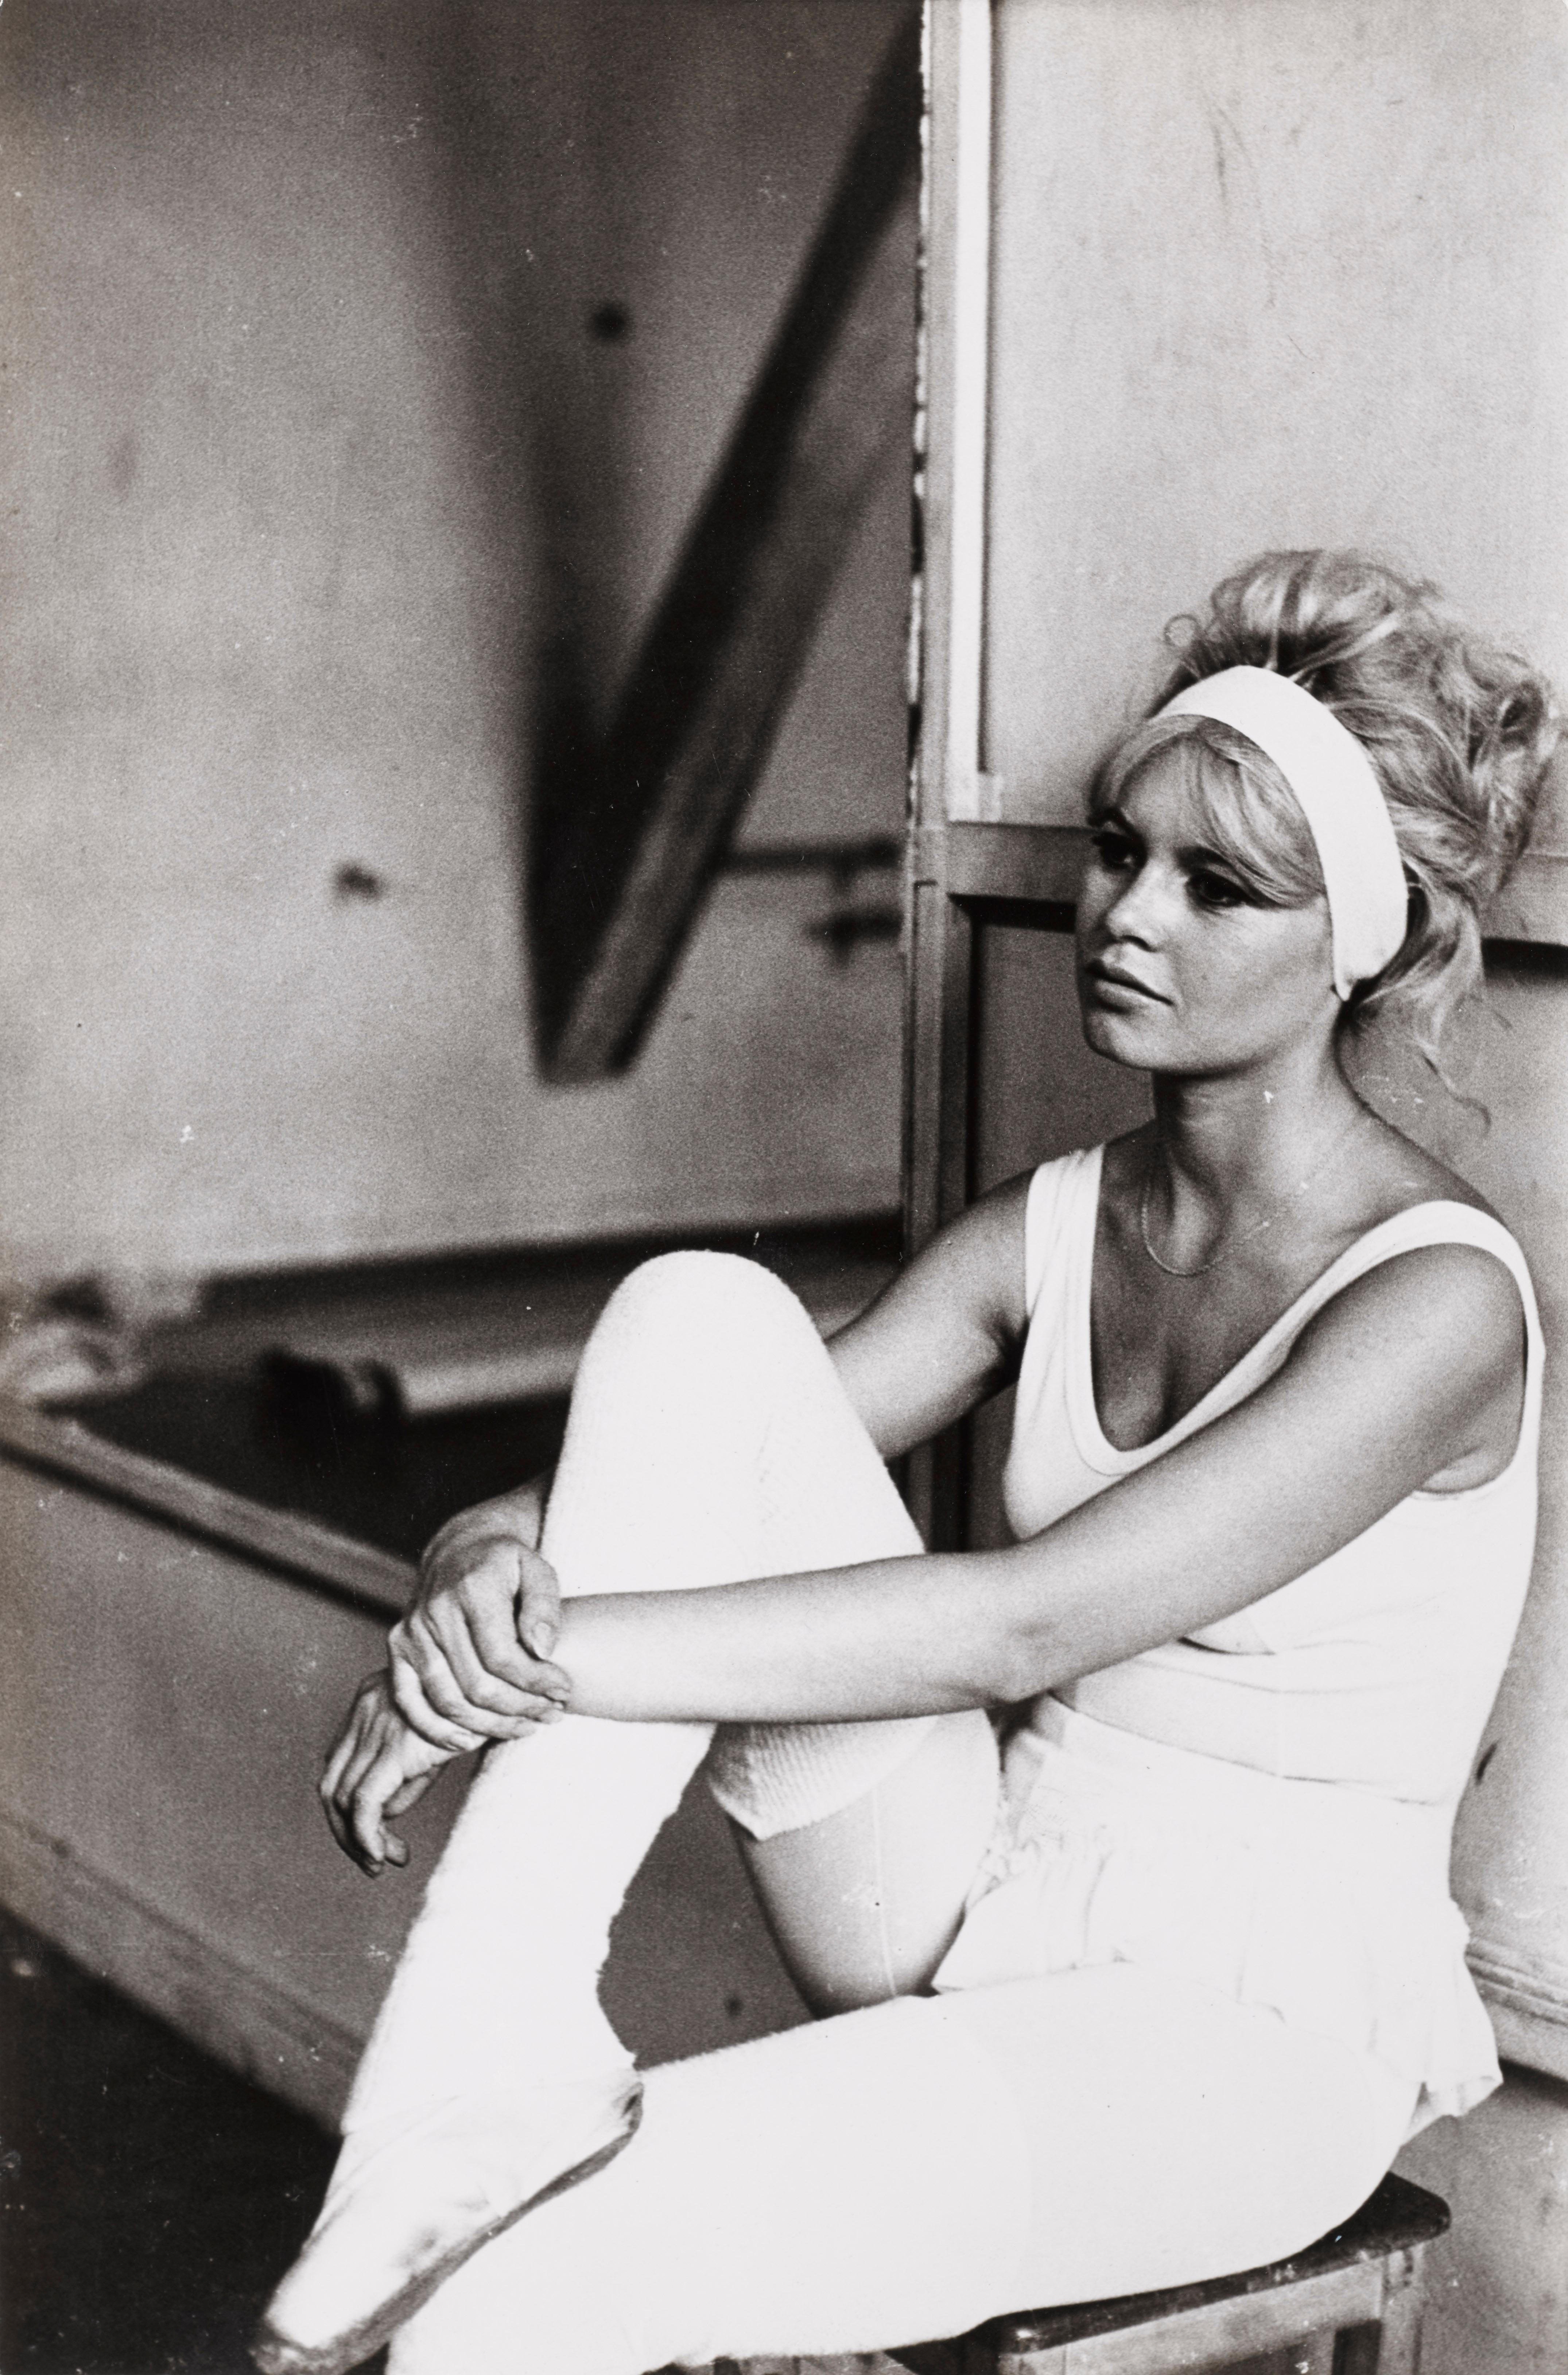 Original 1962 French vintage black and white publicity photograph of Brigitte Bardot on the set of the film A Very Private Affair.